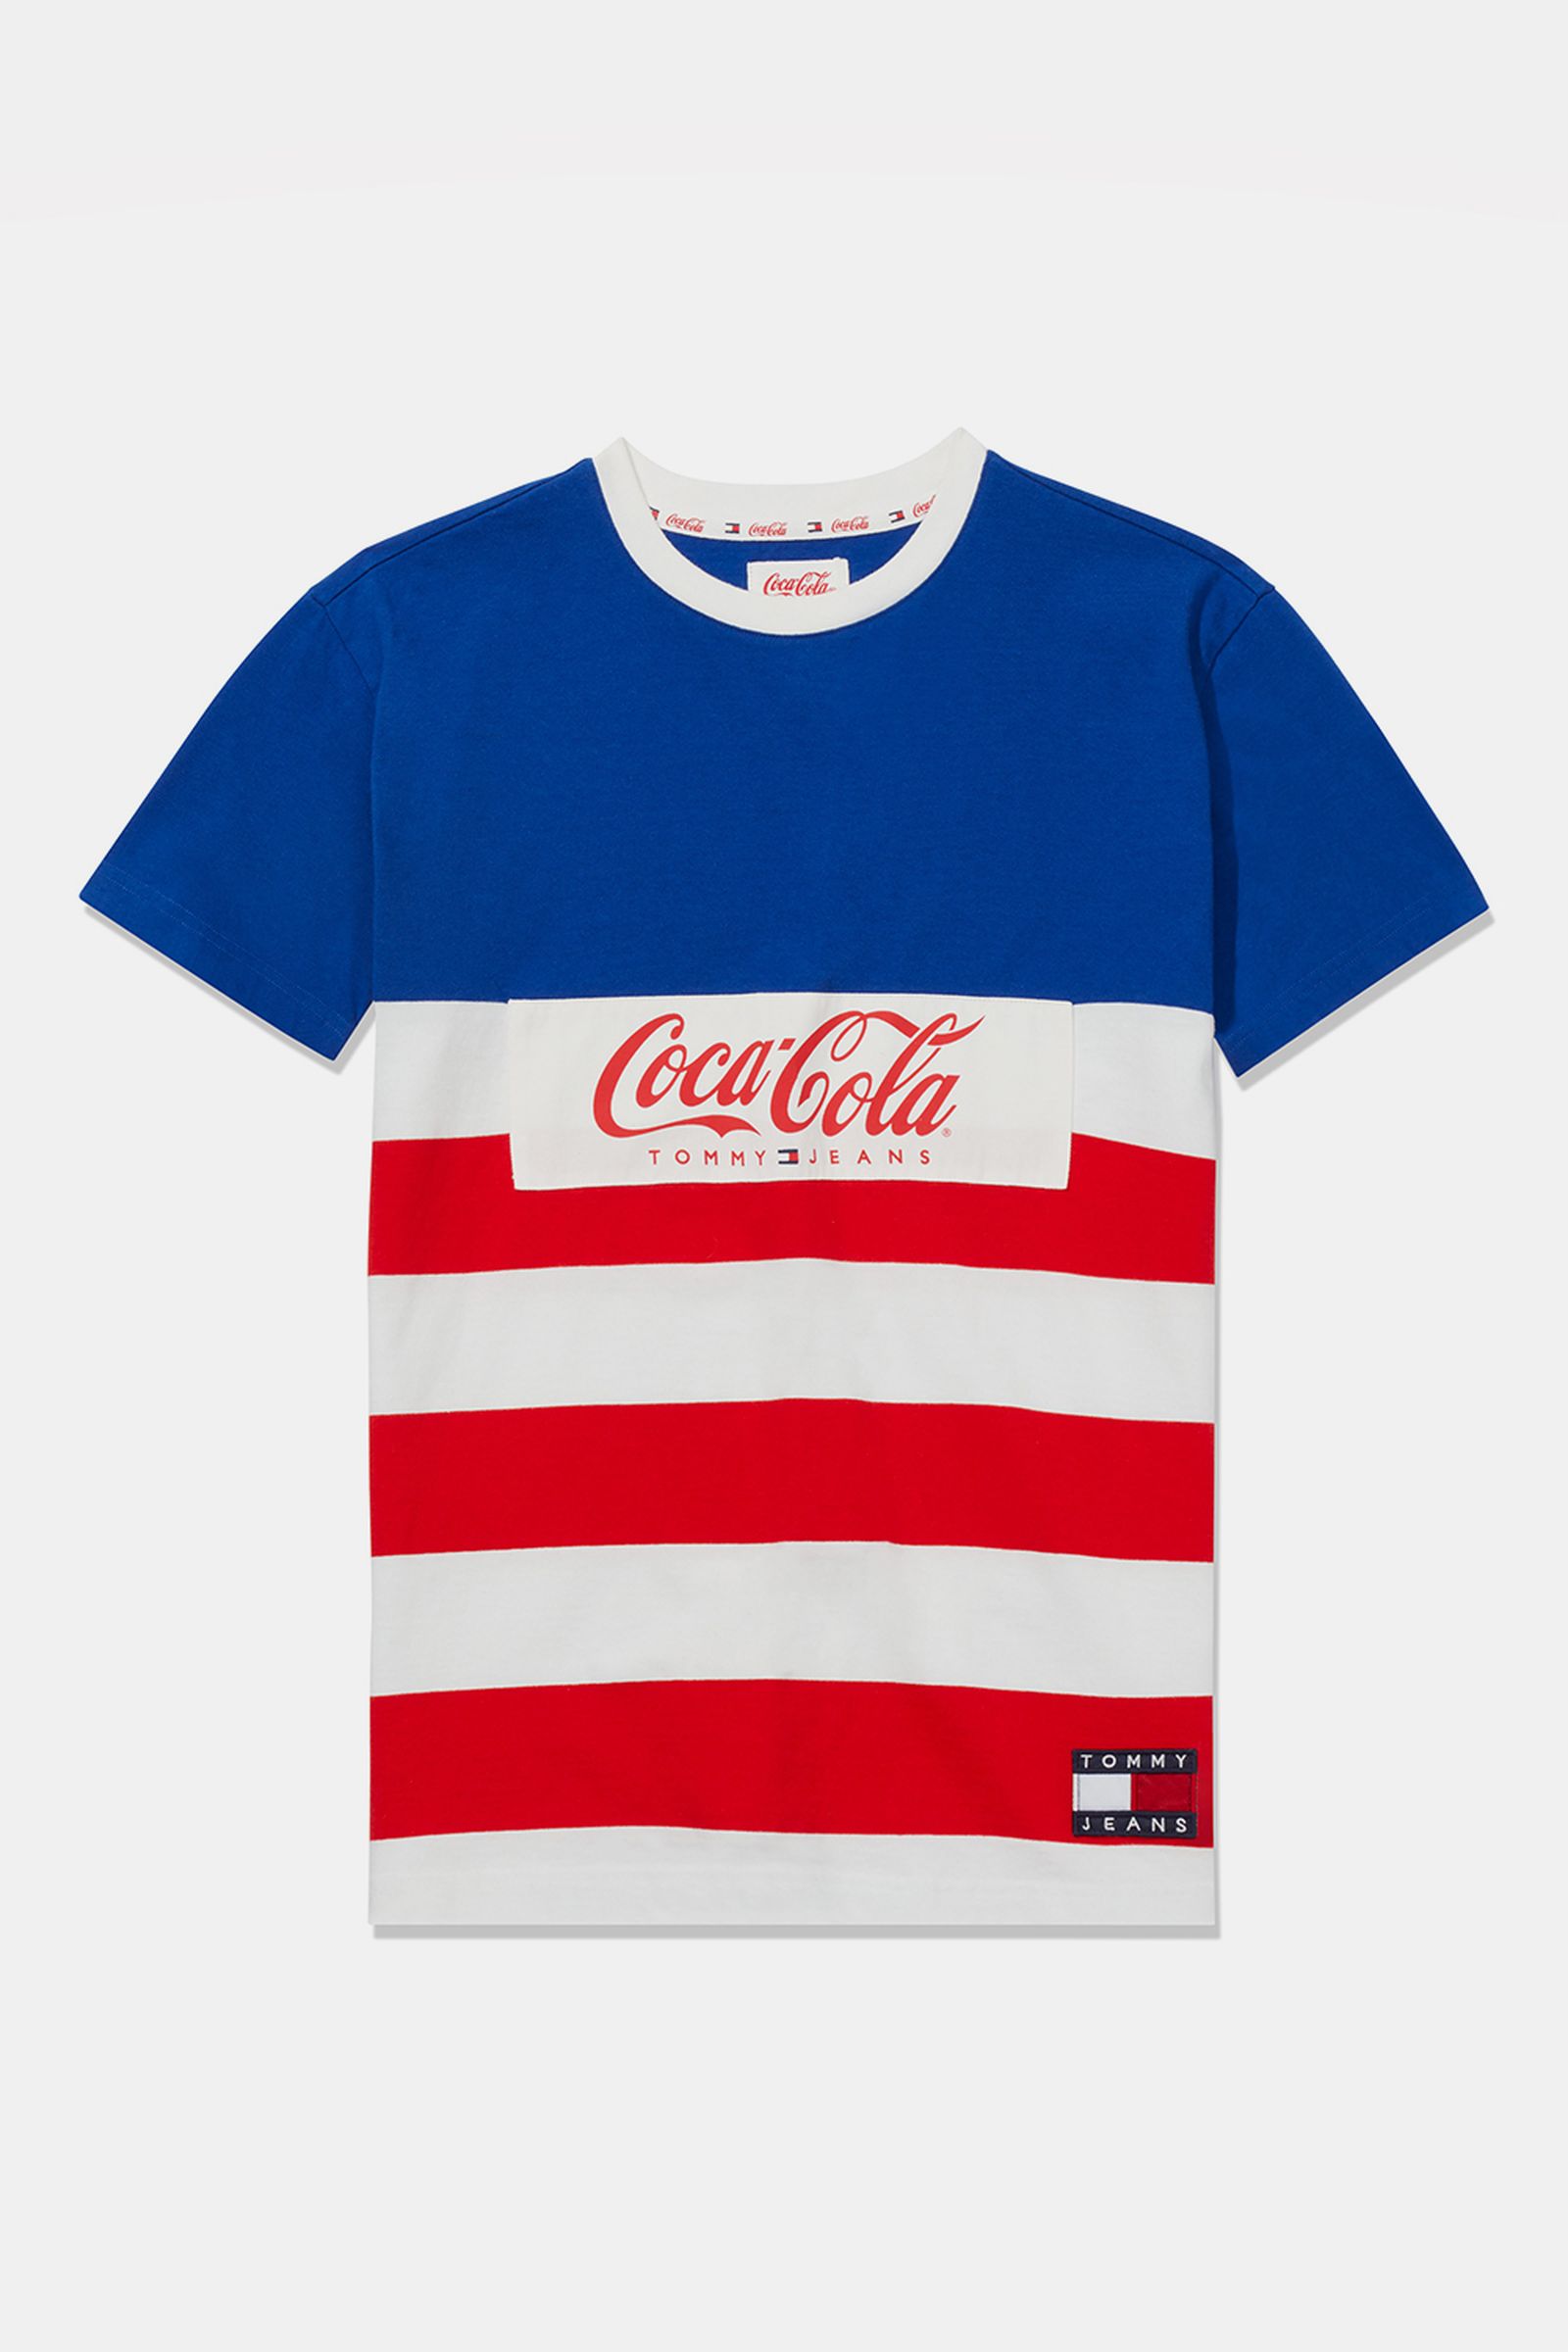 lb Spaceship Bloodstained Tommy Jeans x Coca-Cola SS19 Collection: Shop Here